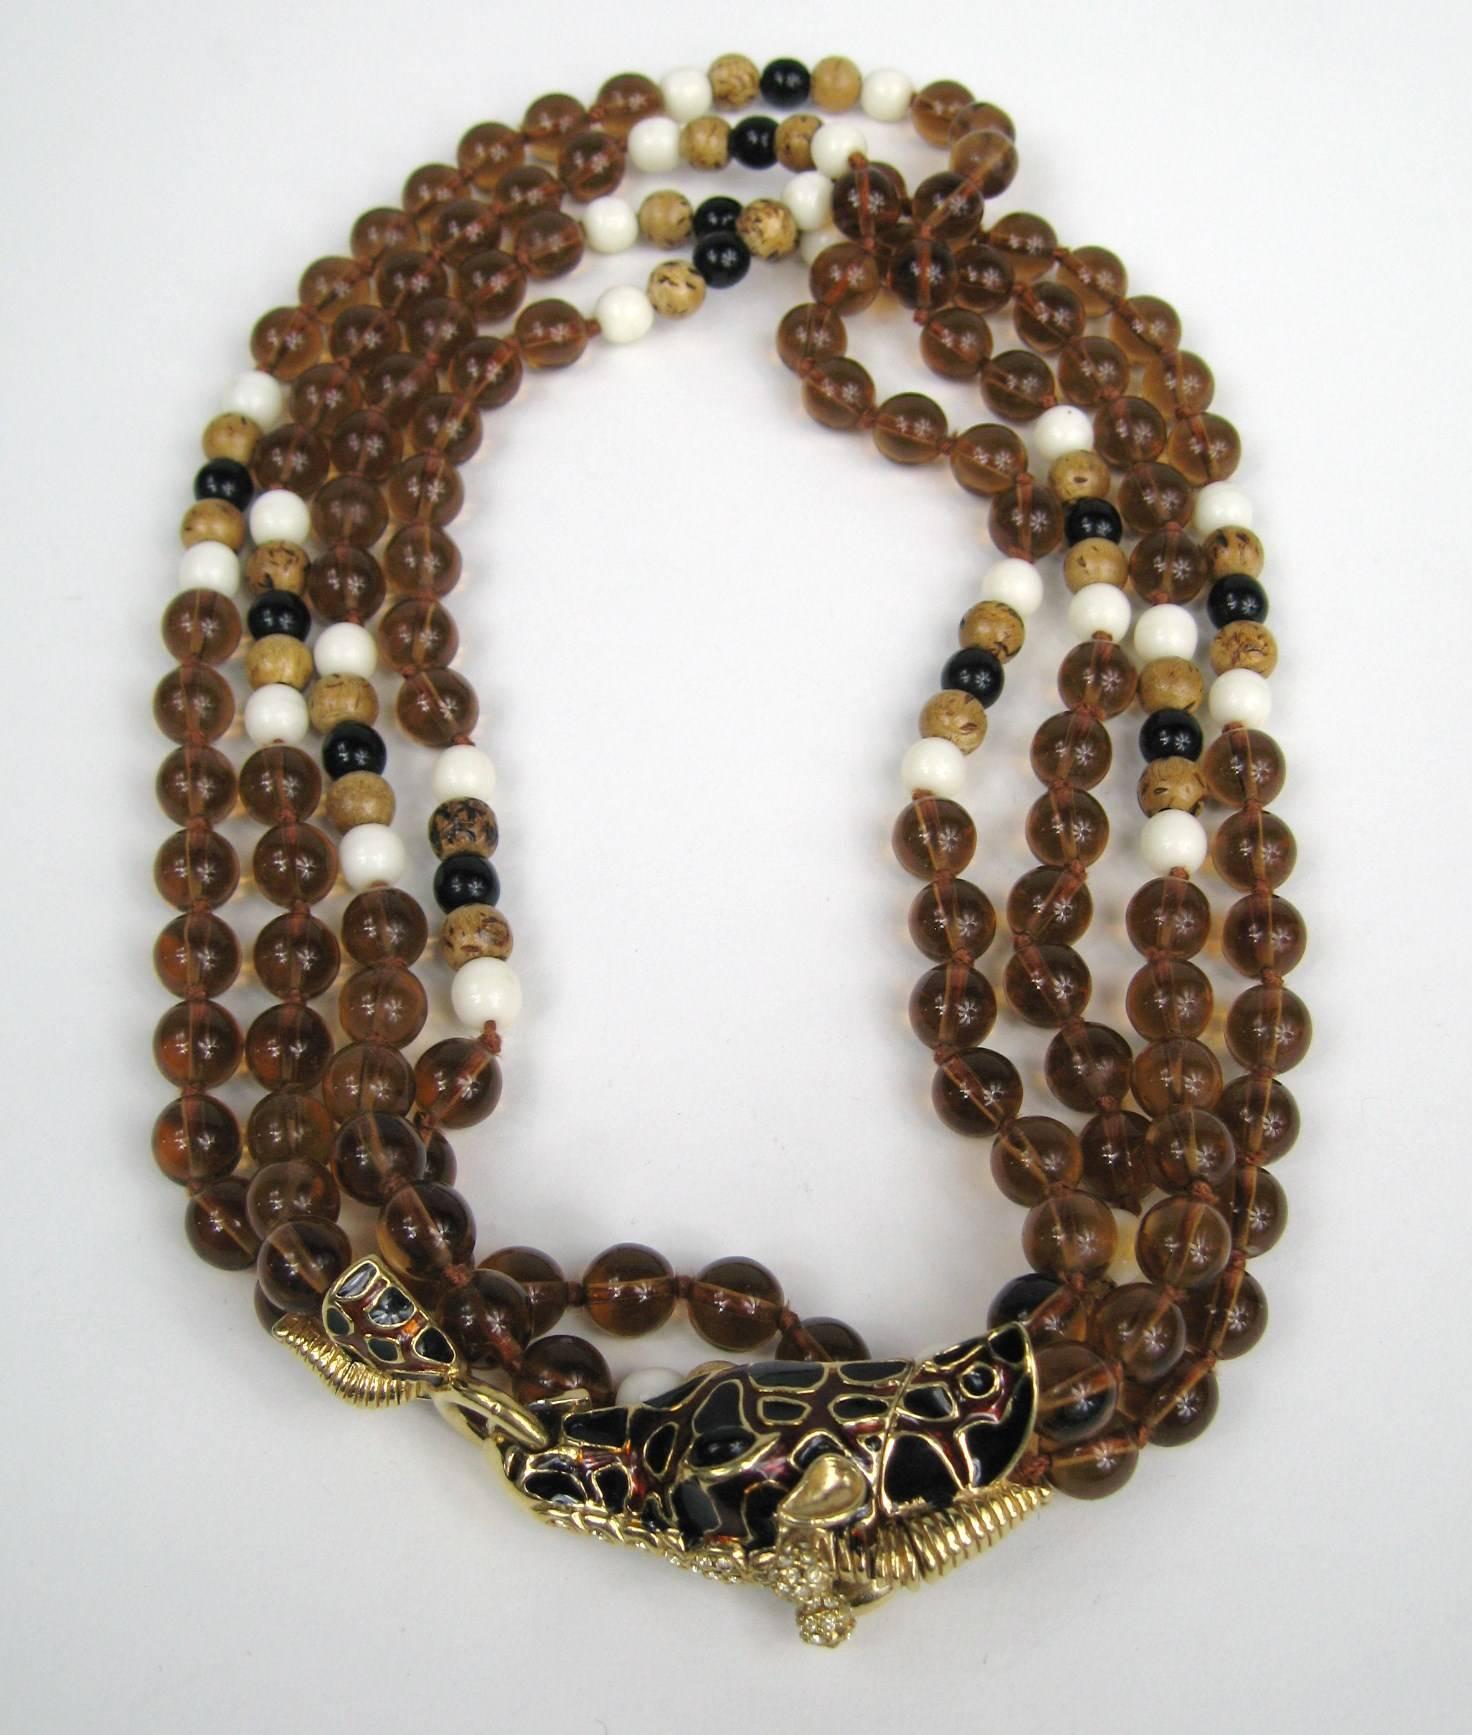 New, never worn  giraffe double strand Ciner Necklace Amber colored, wood and black beading with Black and brown enamel work. Measures 42 inches end to end. It is doubled on the display.  Matching Clip on earrings listed as well. Visit our store